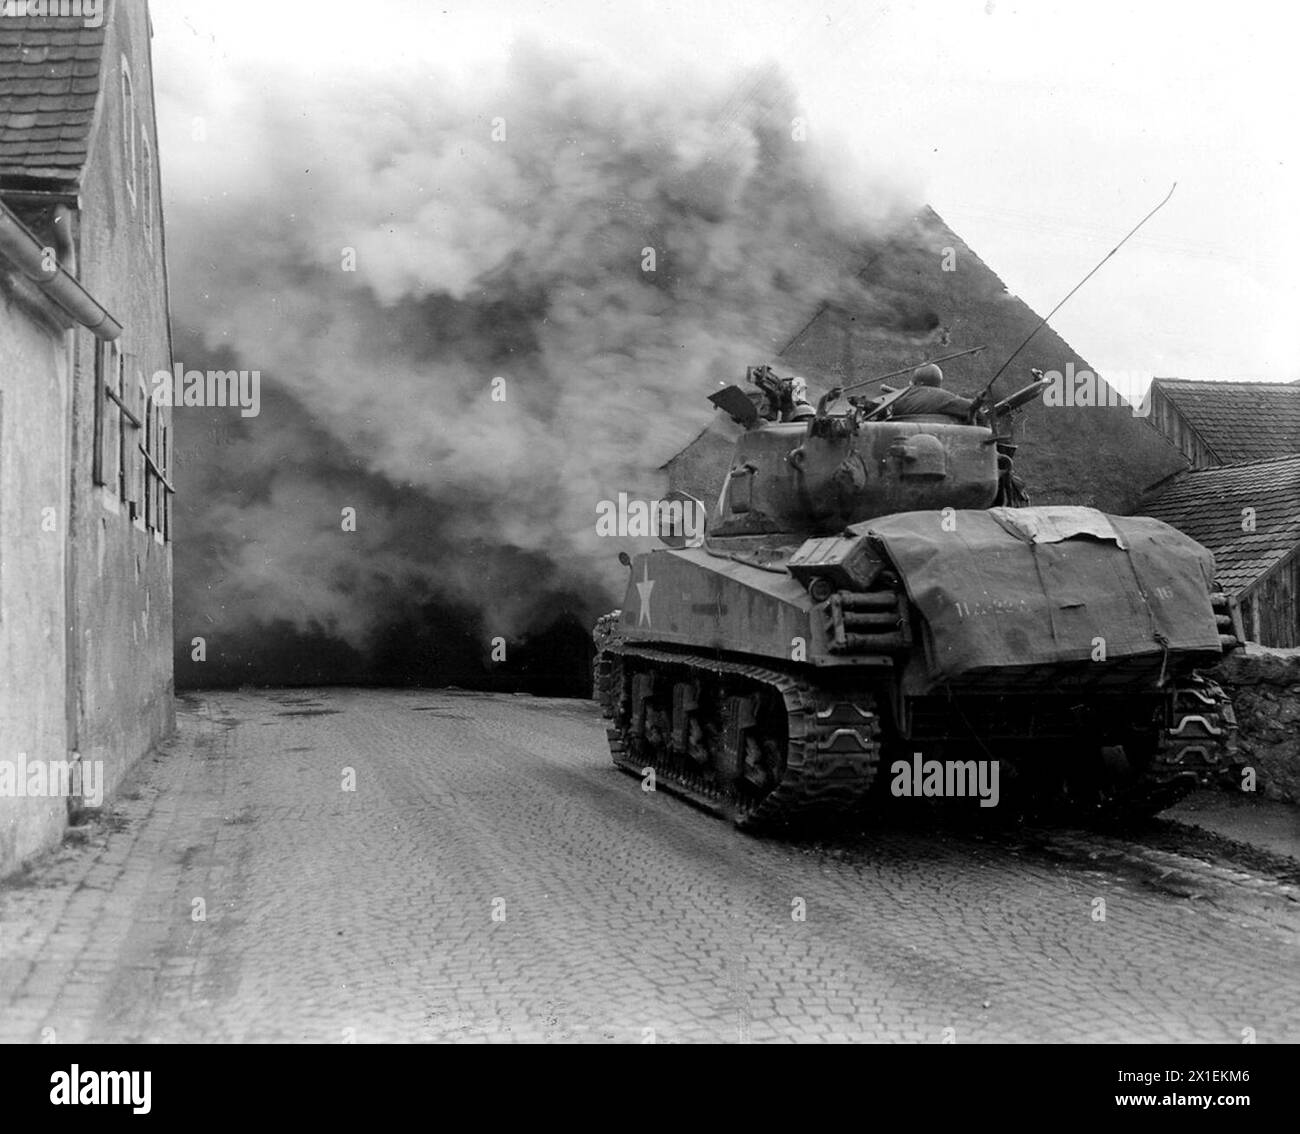 World War II Photos: Original Caption: Wernberg, Germany…Tank of 22nd Tank Battalion, 11th Armored Division, 3rd US Army, stands ready before the house its gun set on fire ca. April 1945 Stock Photo